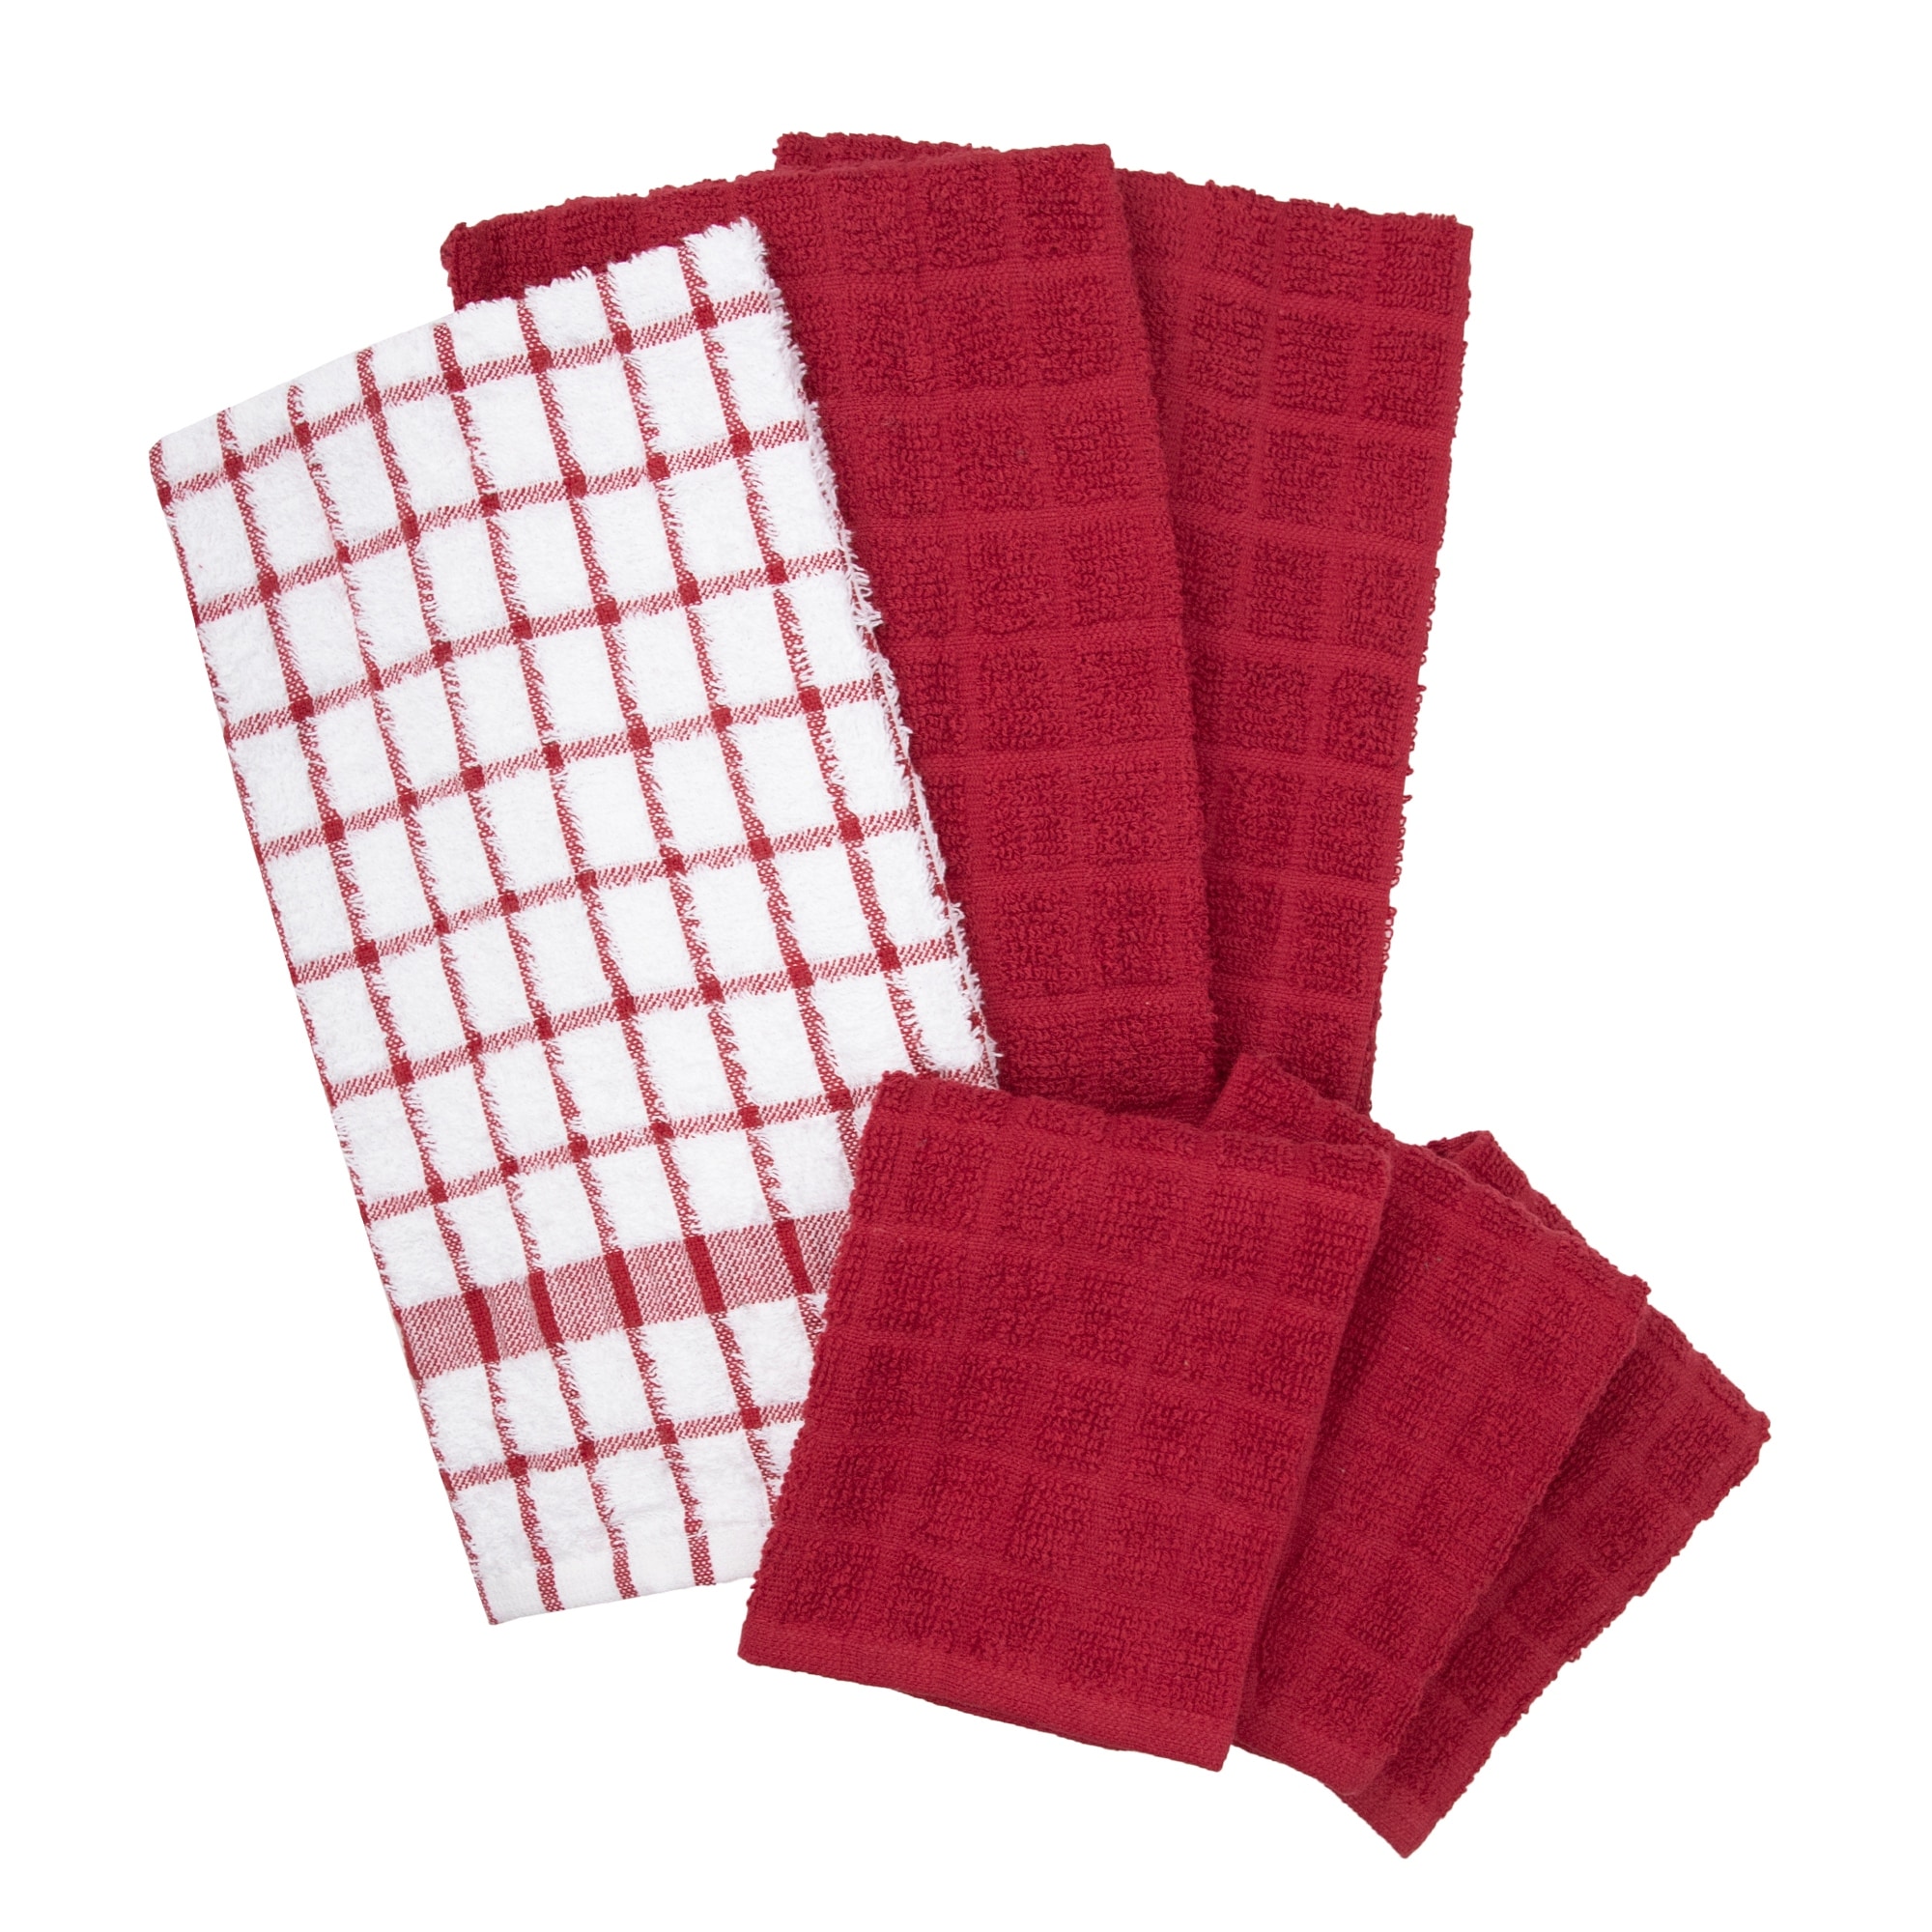 Davenport Terry Kitchen Towels, Set of 4 - On Sale - Bed Bath